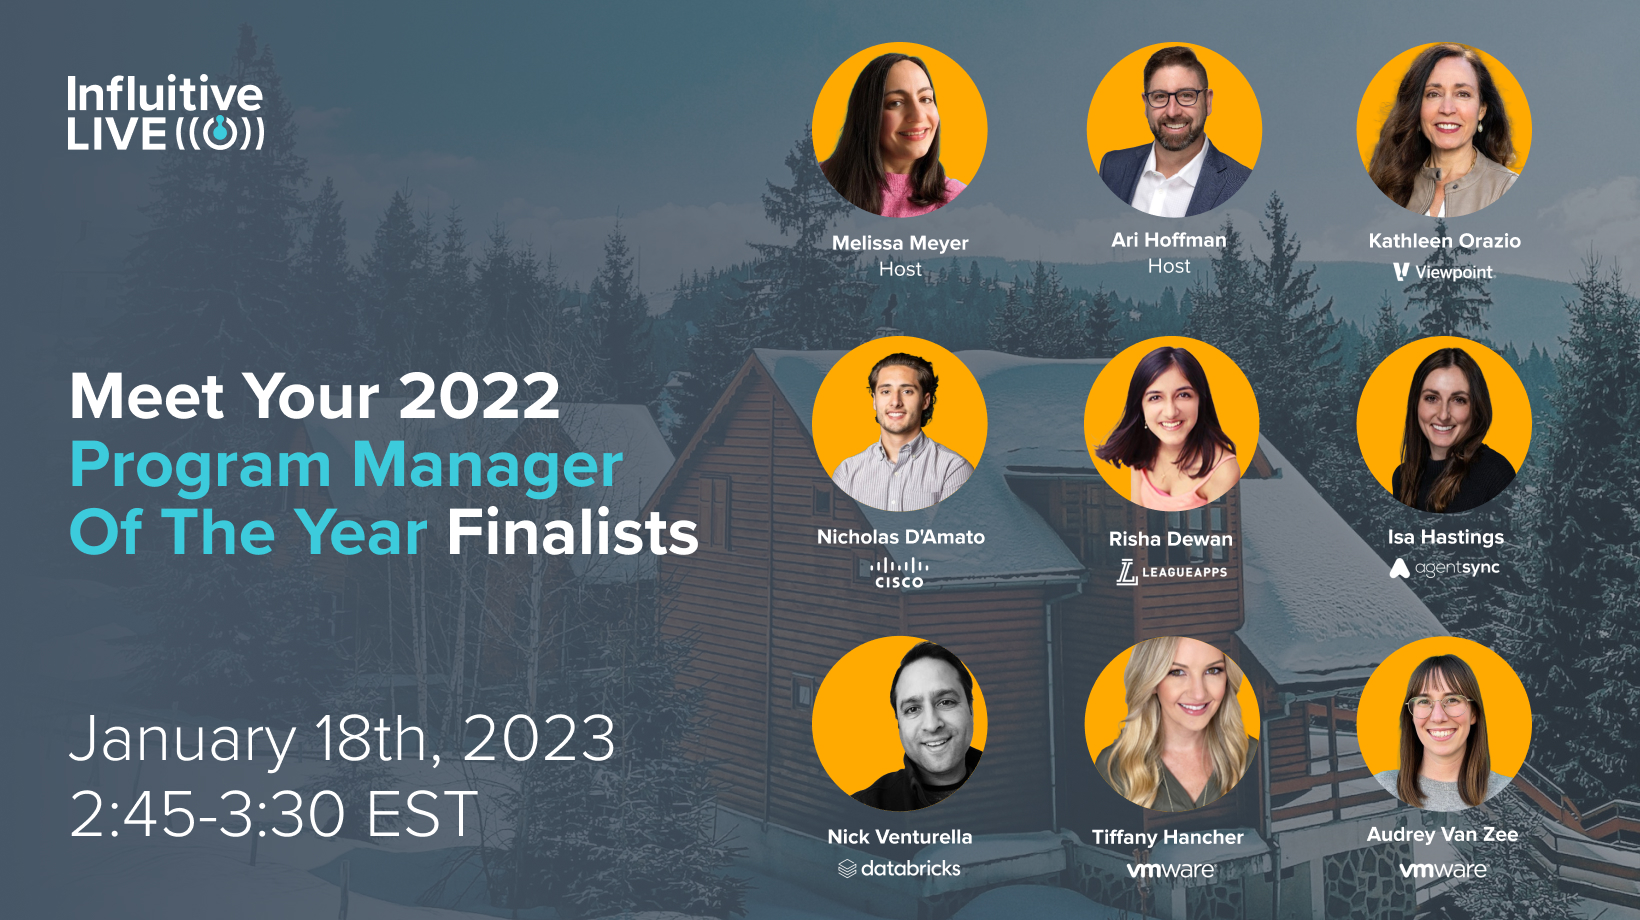 Meet your 2022 Program Manager of the Year Finalists